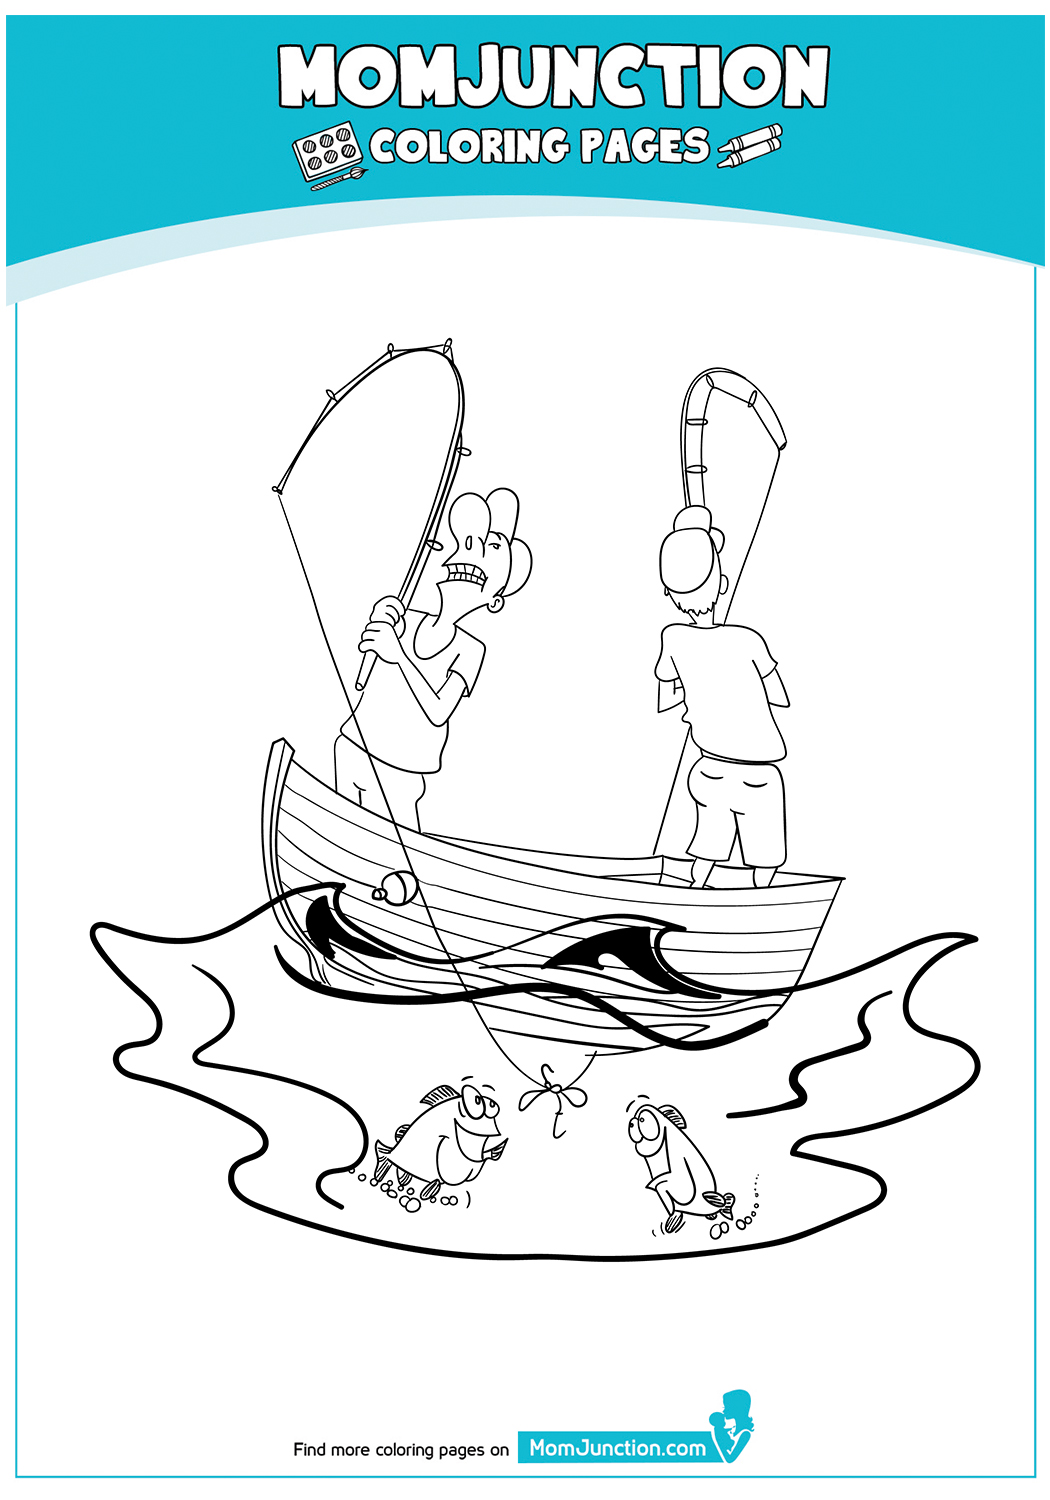 Amusing-Coloring-Page-Of-A-Fishermen-17